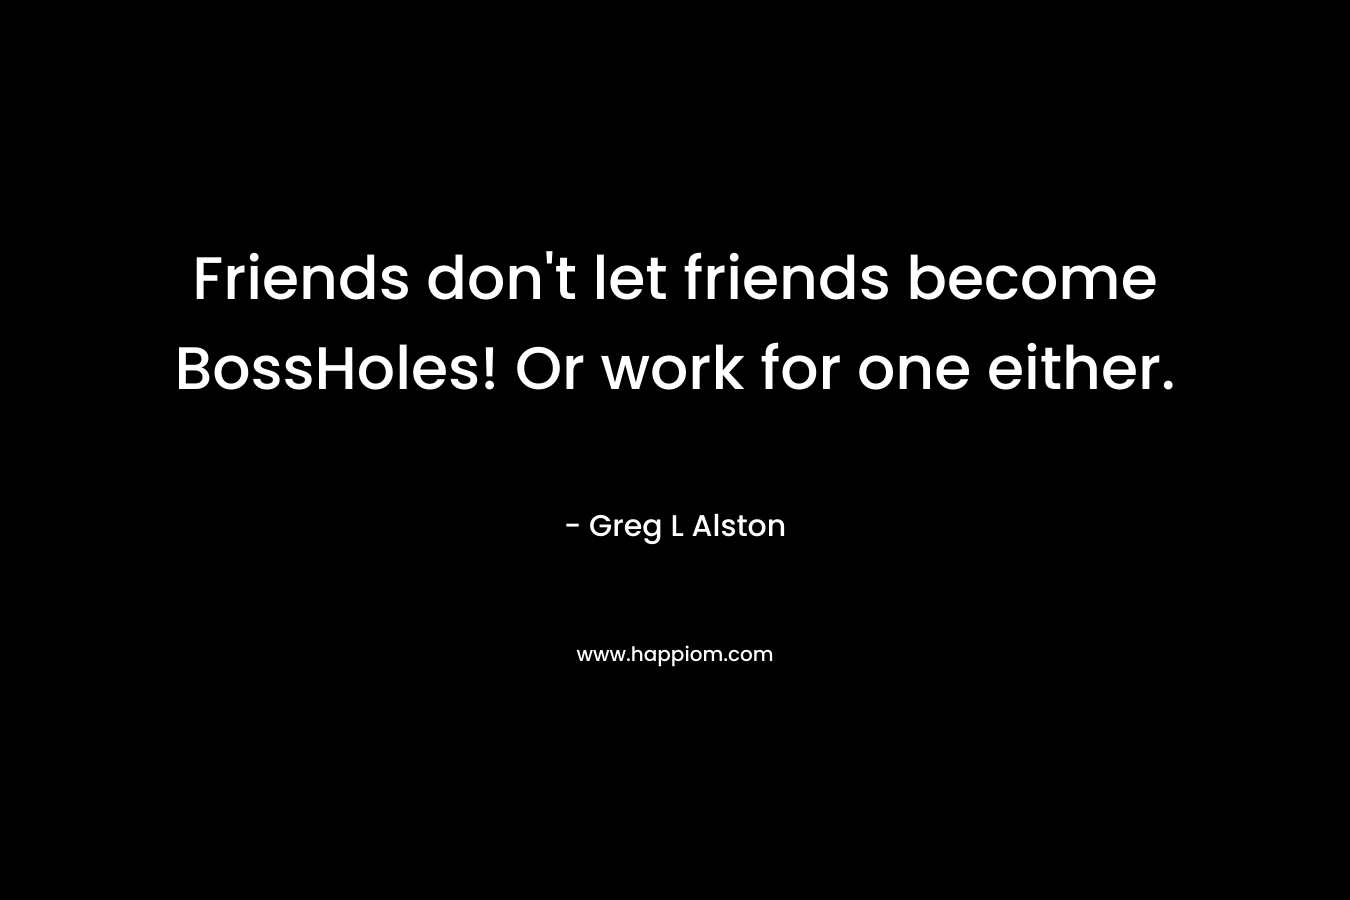 Friends don't let friends become BossHoles! Or work for one either.